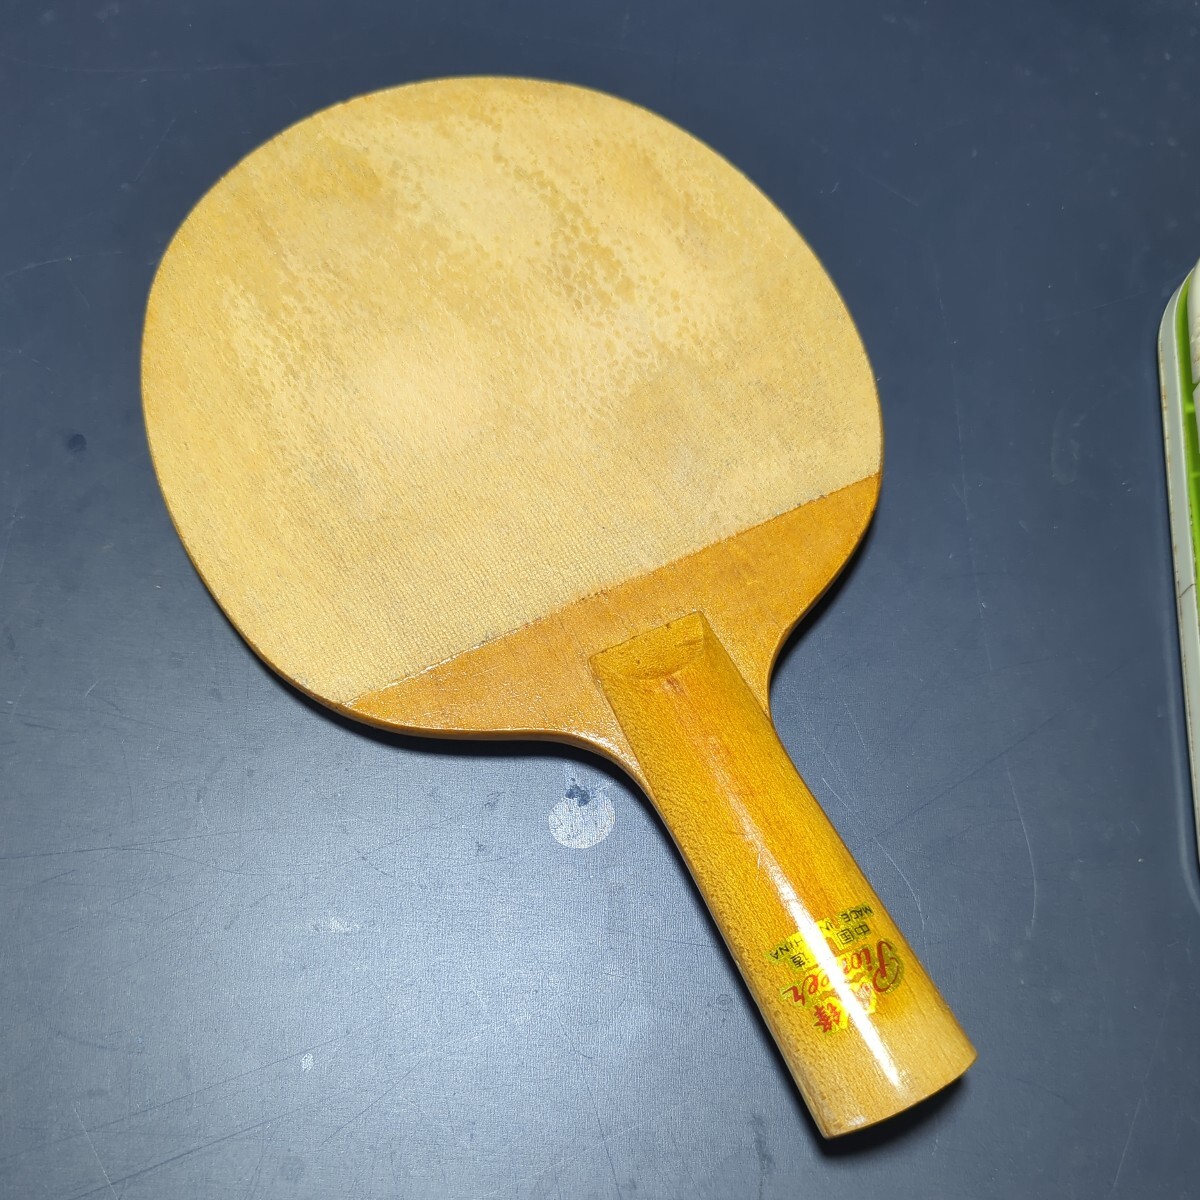  ping-pong racket China retro abroad made she-k..Pioneer old model special order records out of production KONI k